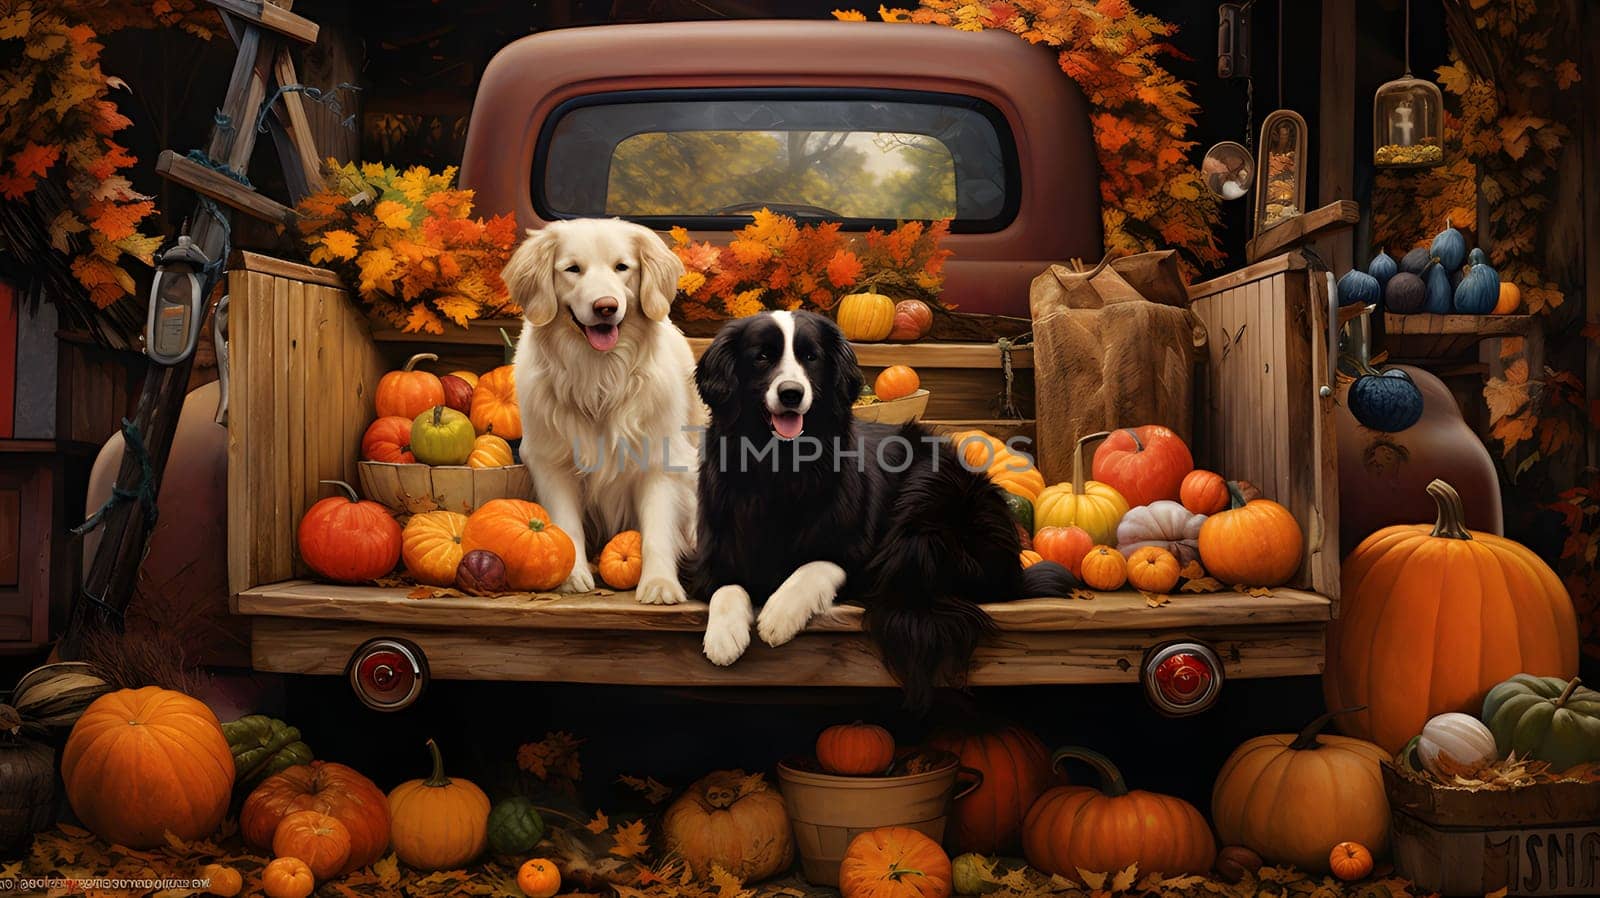 Two dogs on a pickup trailer, pumpkins and autumn leaves all around. Pumpkin as a dish of thanksgiving for the harvest. by ThemesS